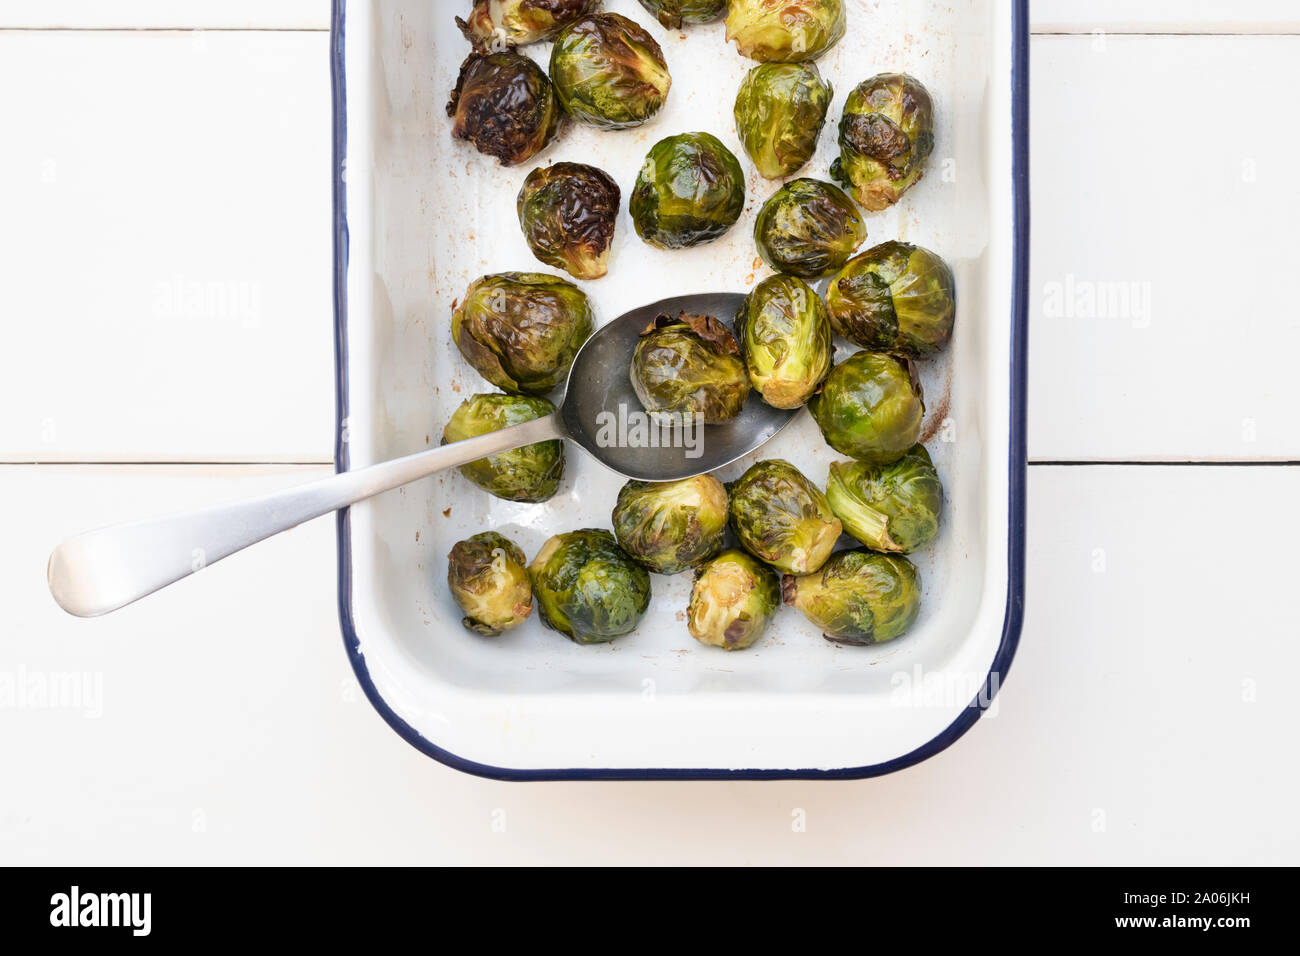 Brassica oleracea. Roasted Brussel sprouts in a white enamel roasting dish with spoon on a white wooden  background Stock Photo